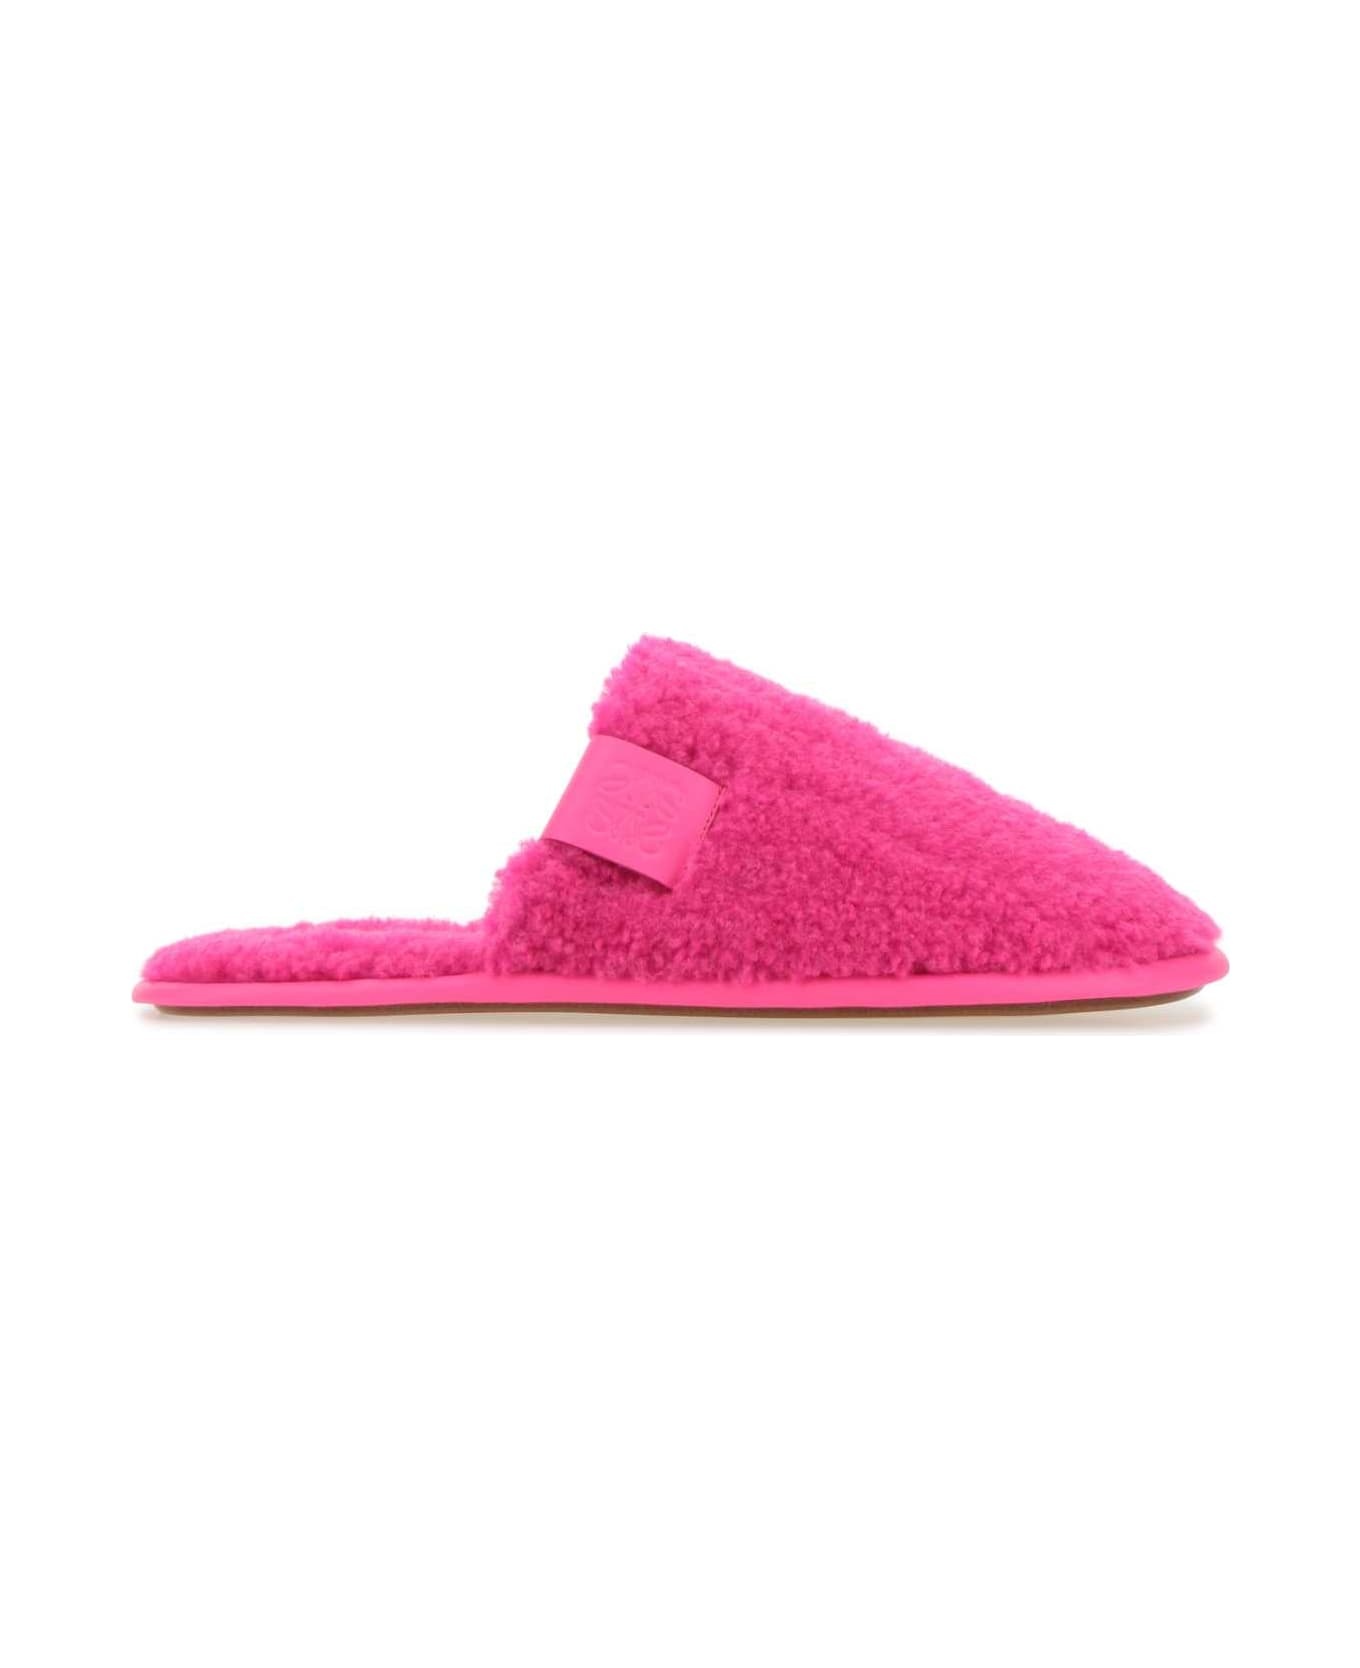 Fluo Pink Pile Slippers - 1